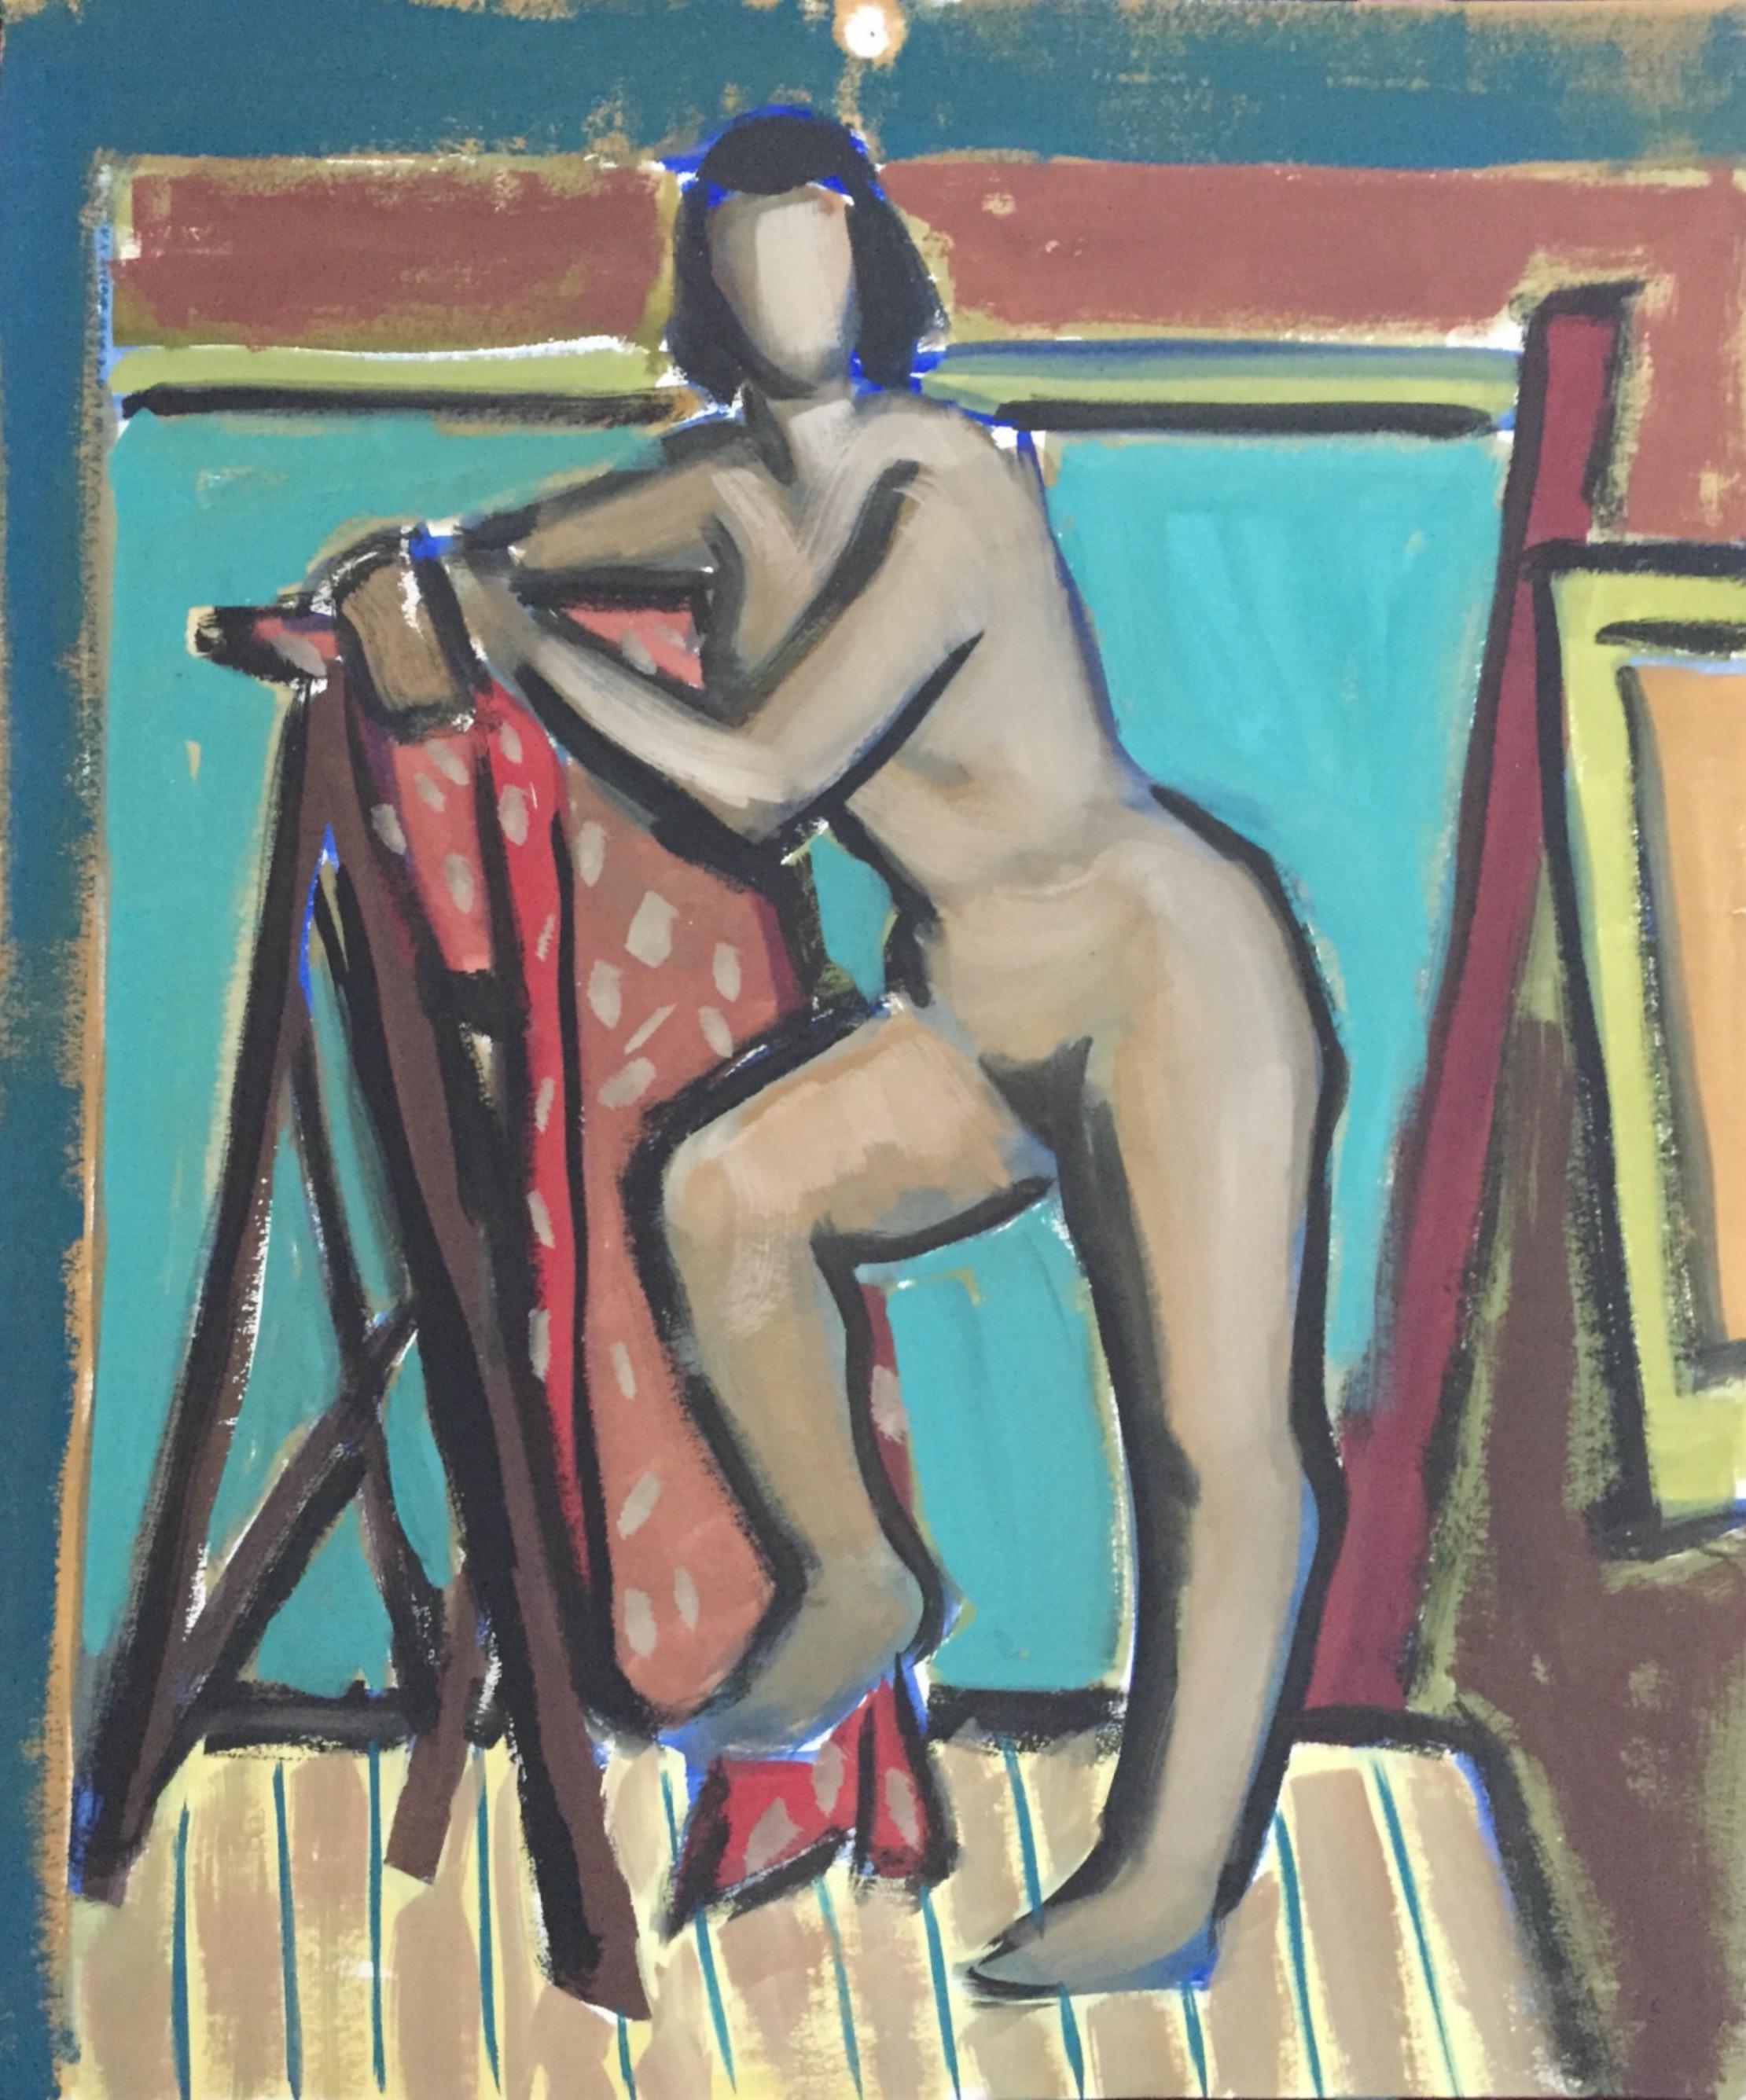 Unknown Nude Painting - 1950s "Leaning" Figurative Gouache Painting